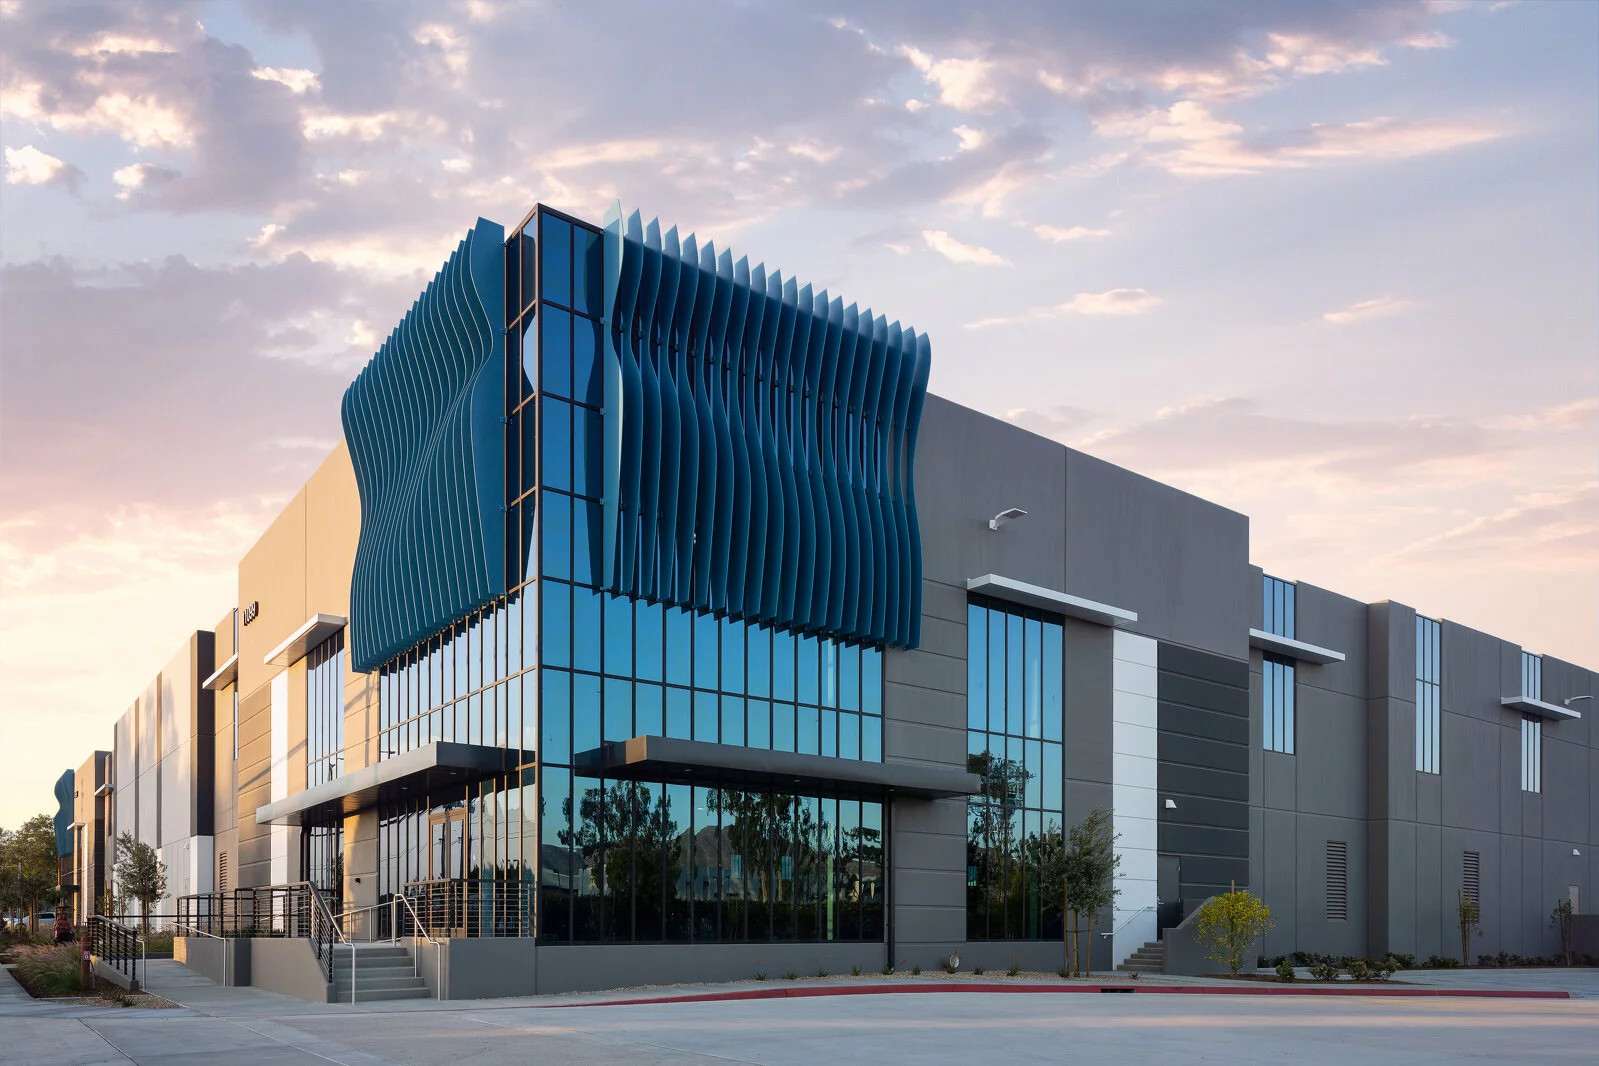 Exterior Almond Avenue facility, contemporary blue wave design on glass exterior, photo taken at sunset.